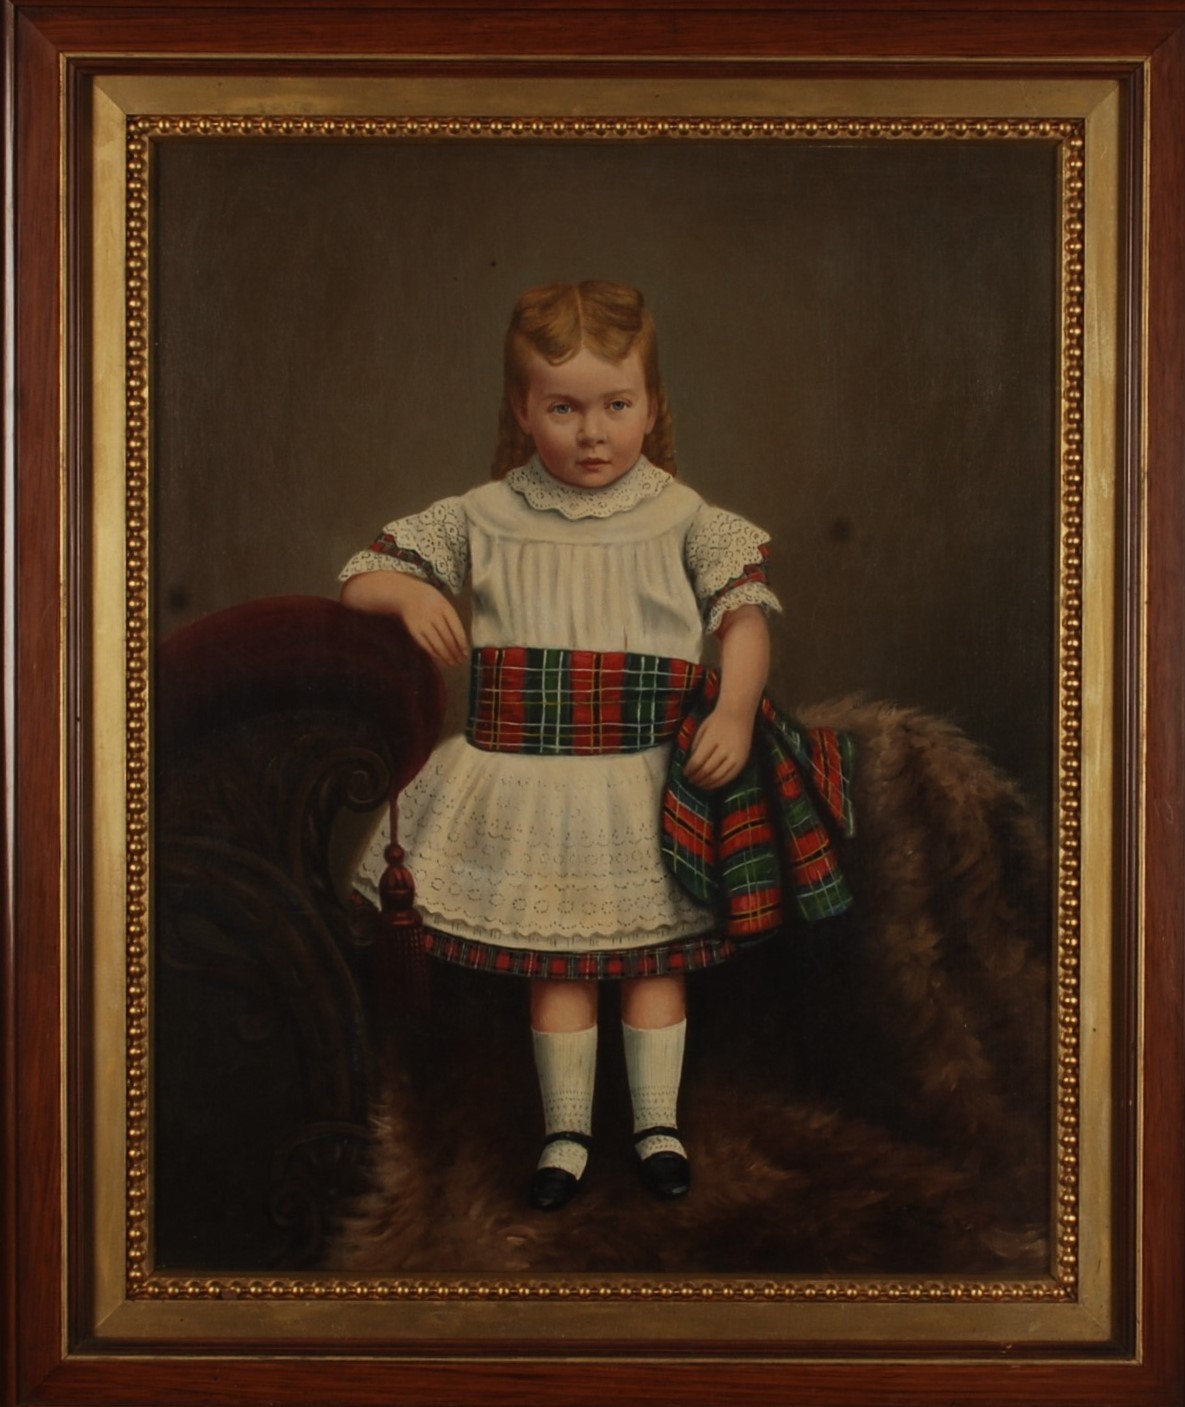 S J PRIEST Portrait of a Scottish Girl Oil on canvas Signed and dated 1894 50 x 39cm Together with - Image 2 of 6